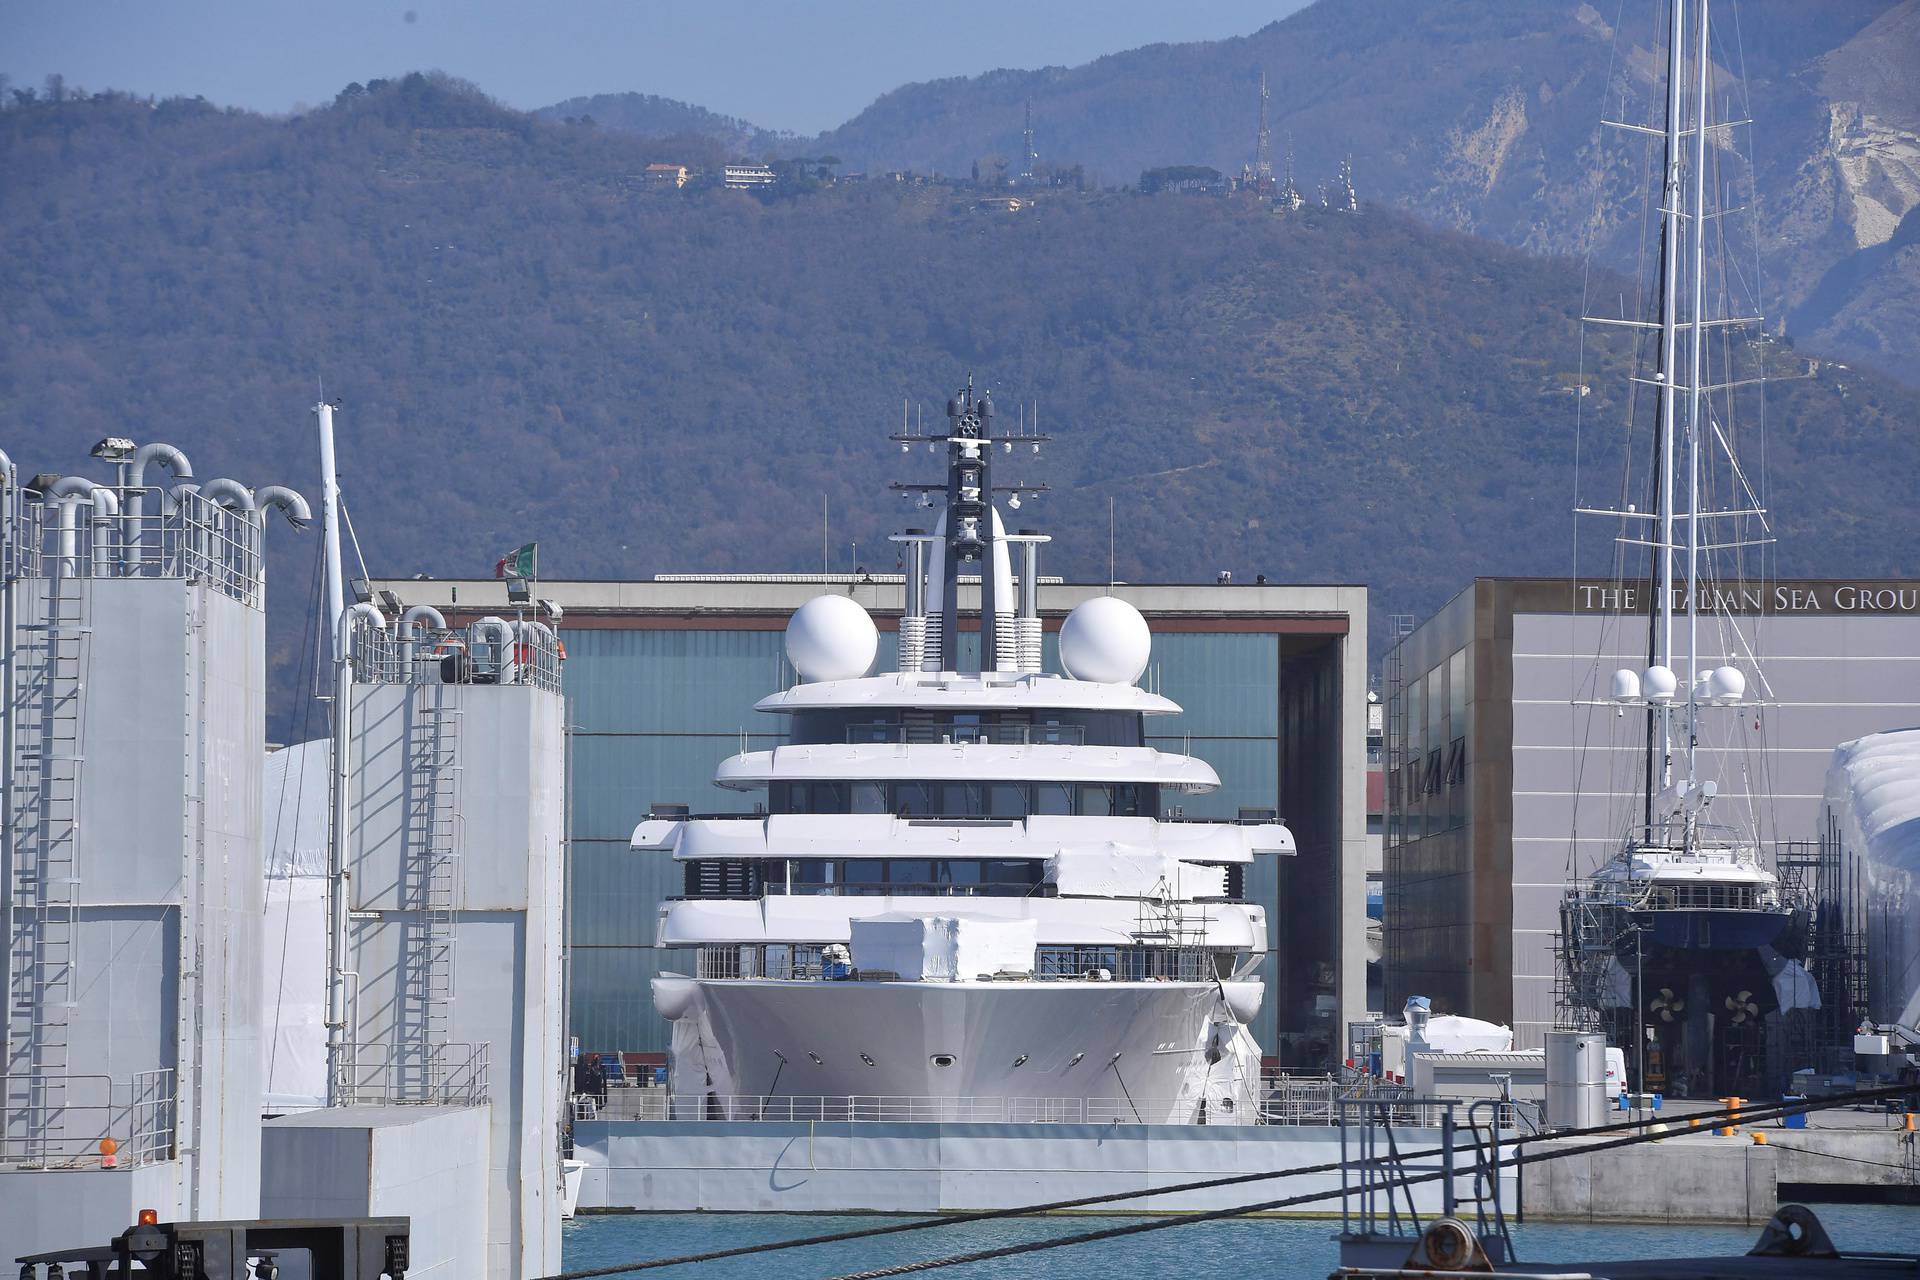 Superyacht allegedly linked to Putin docked in Italy